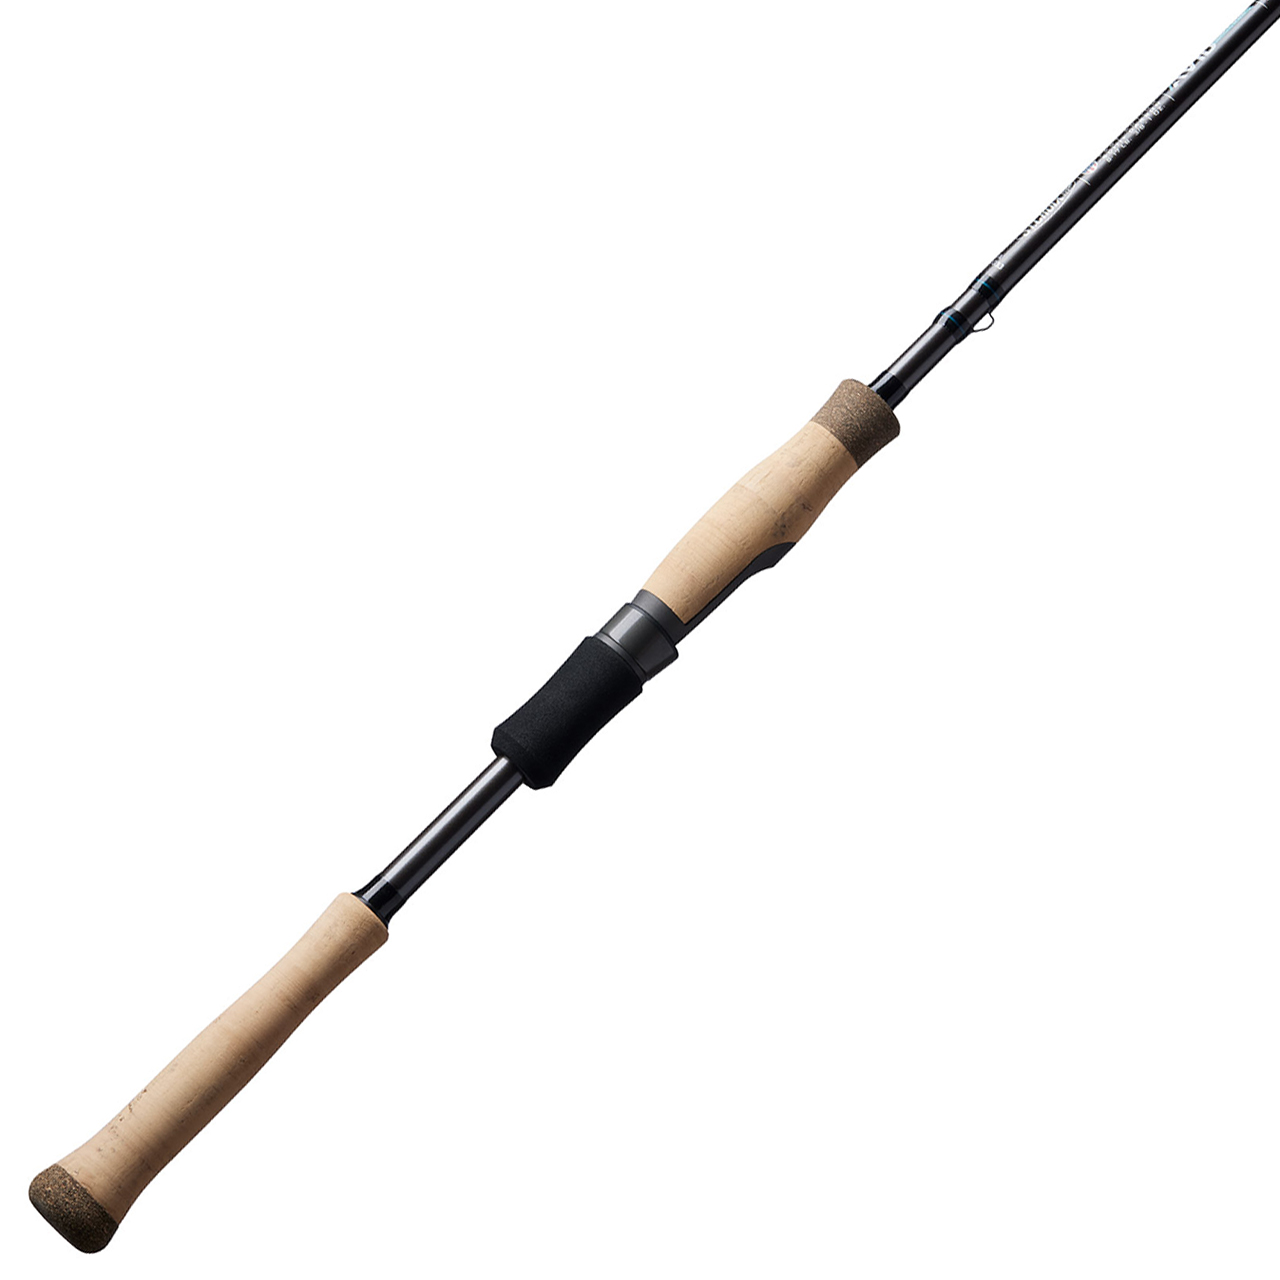 Who Makes A Better Rod? St.croix Or G.loomis? - Fishing Rods